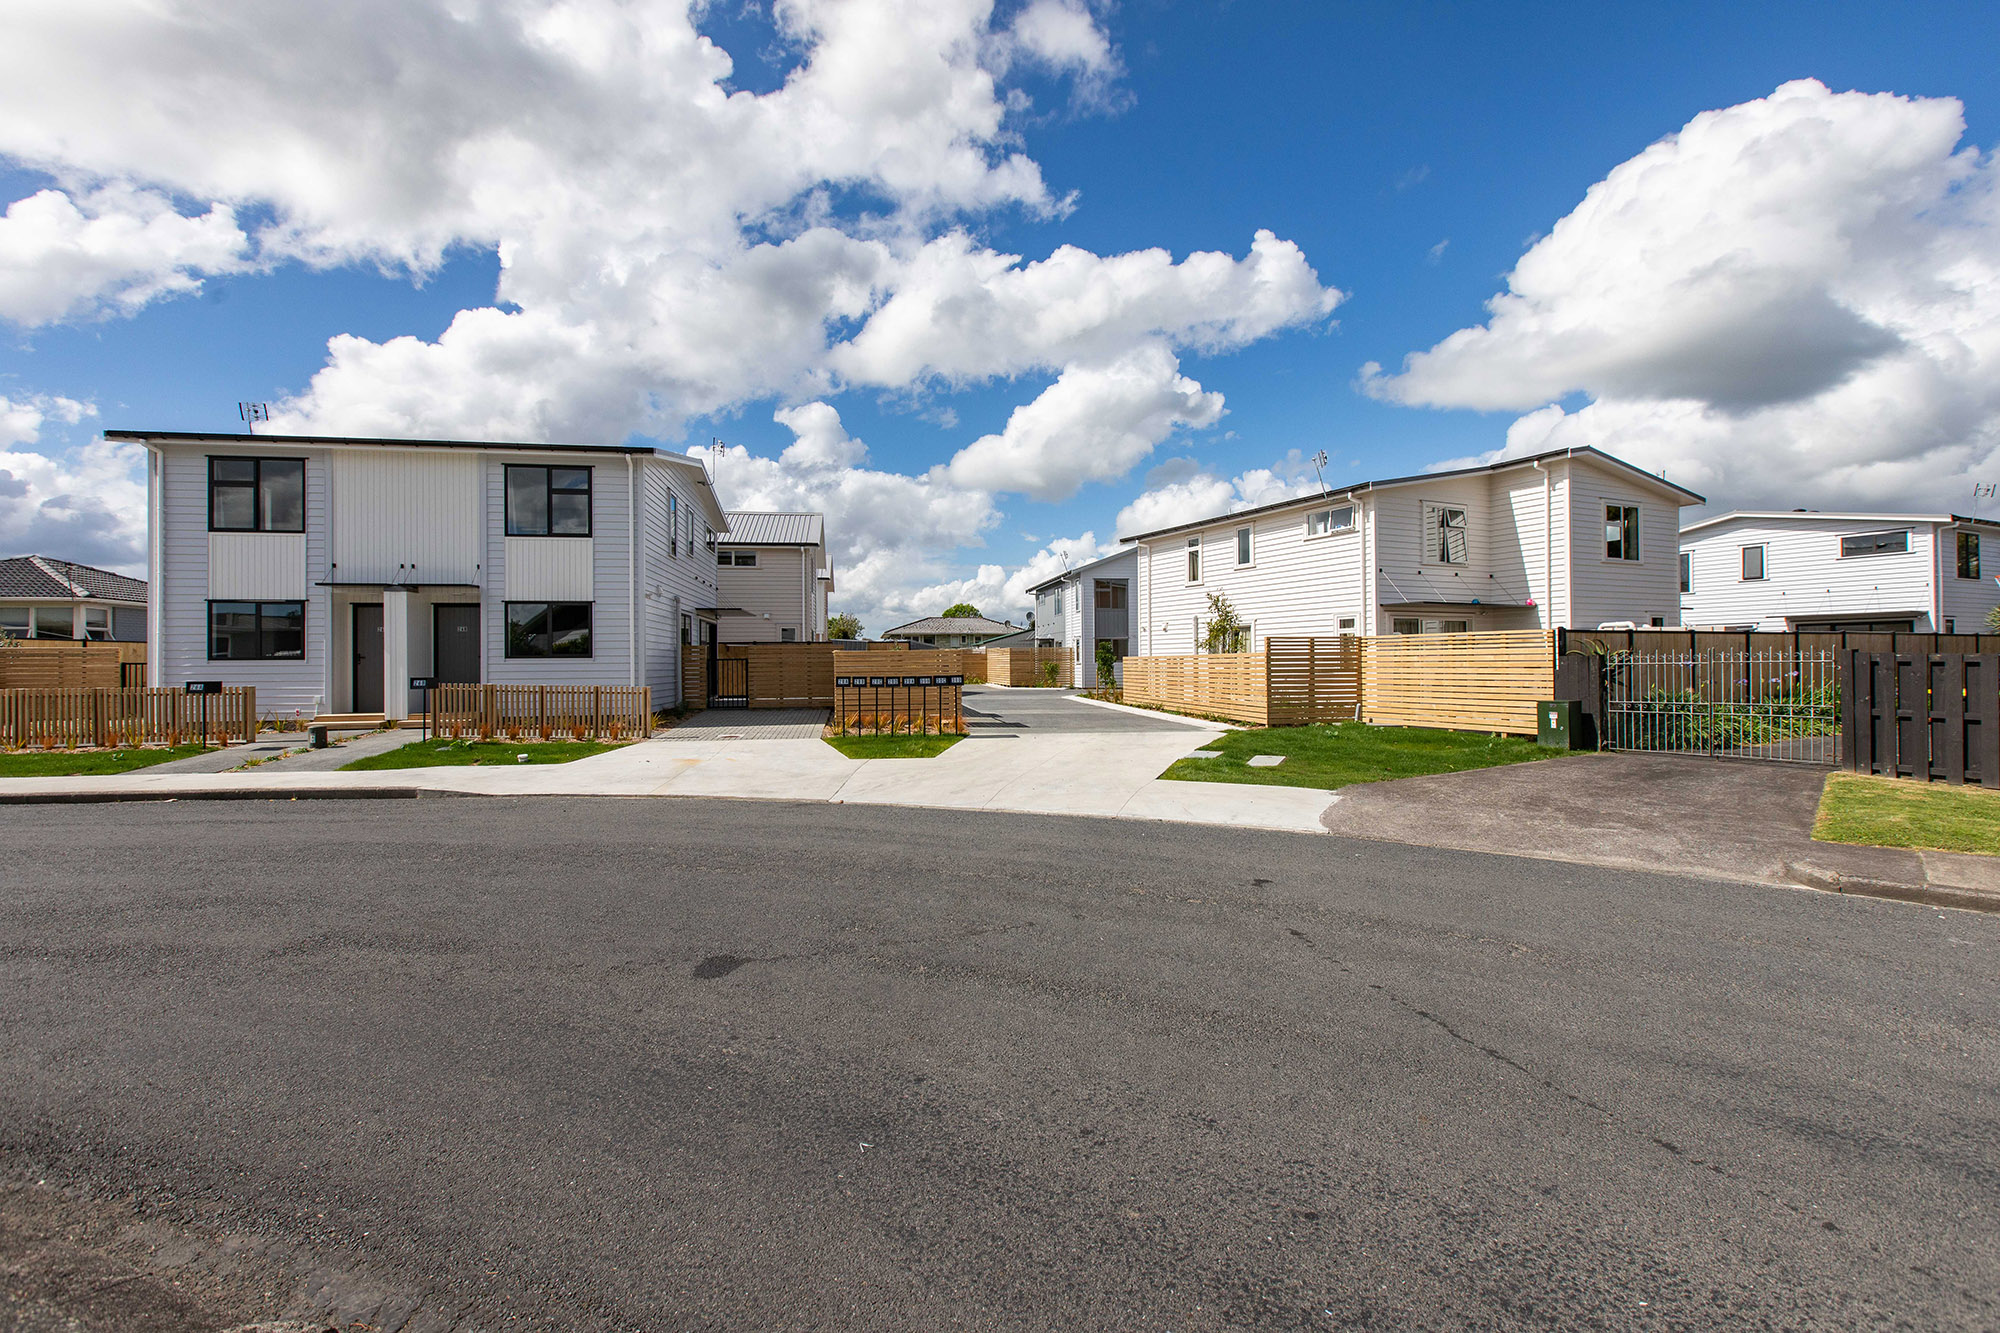 Tairere Crescent completed AR106453 F8A9122